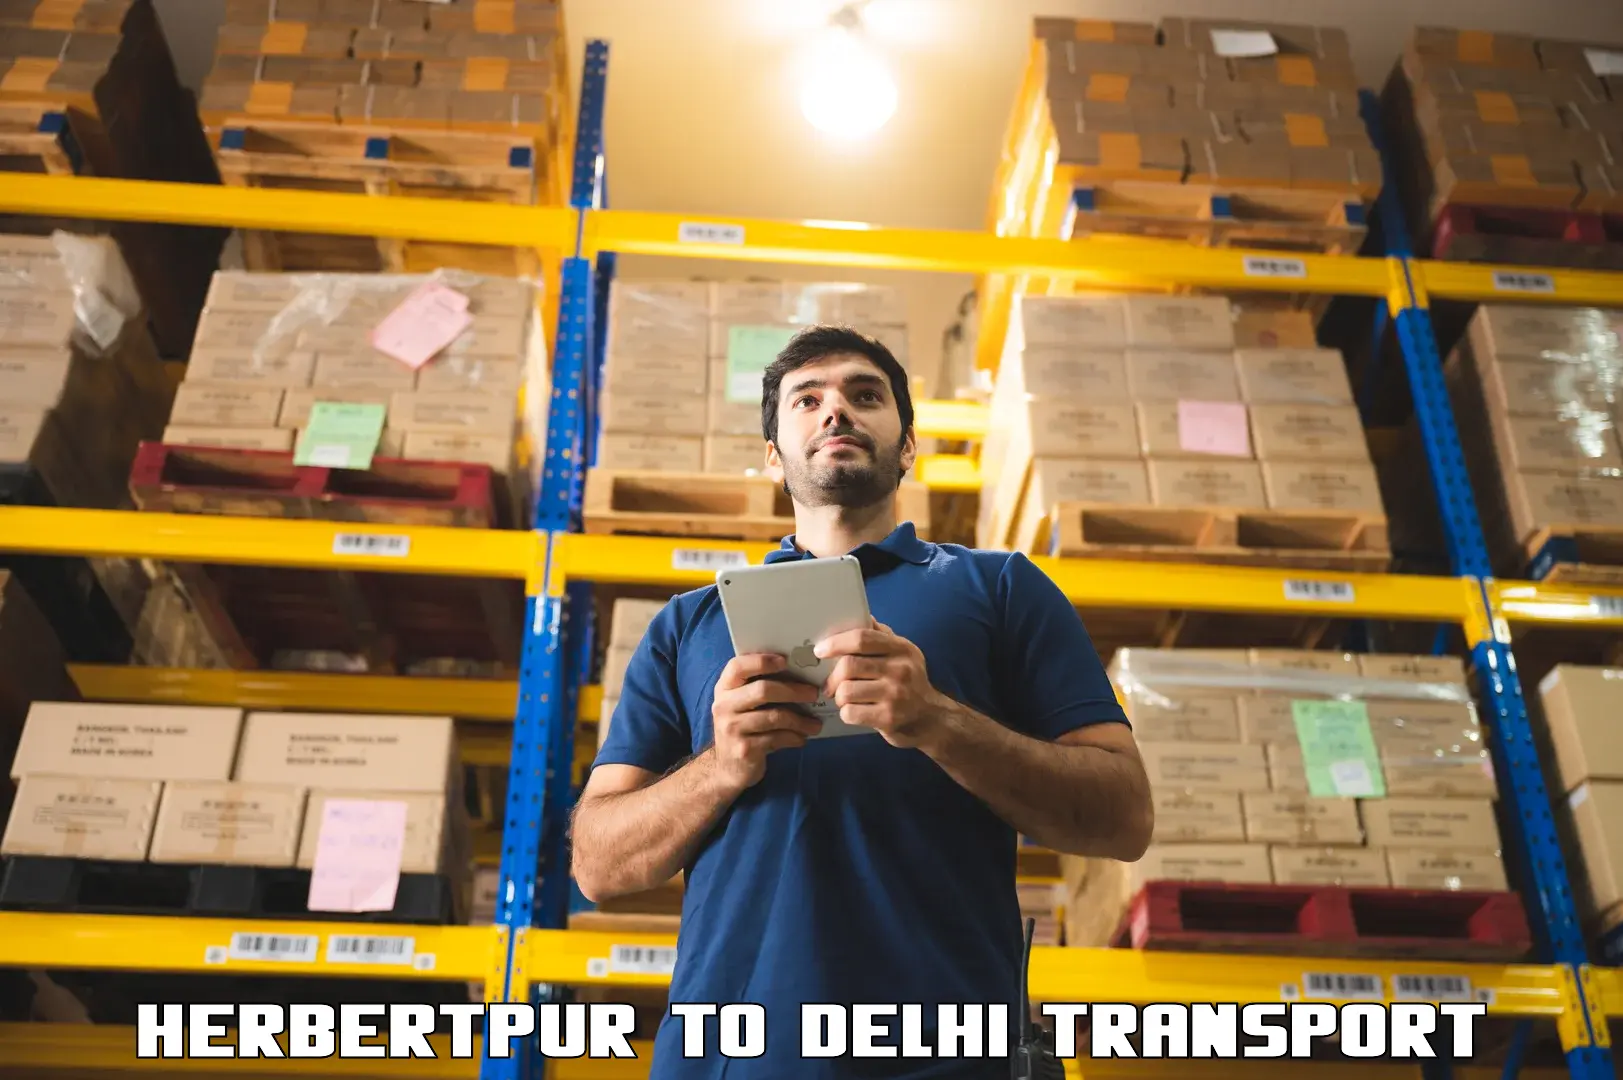 Two wheeler parcel service Herbertpur to NCR